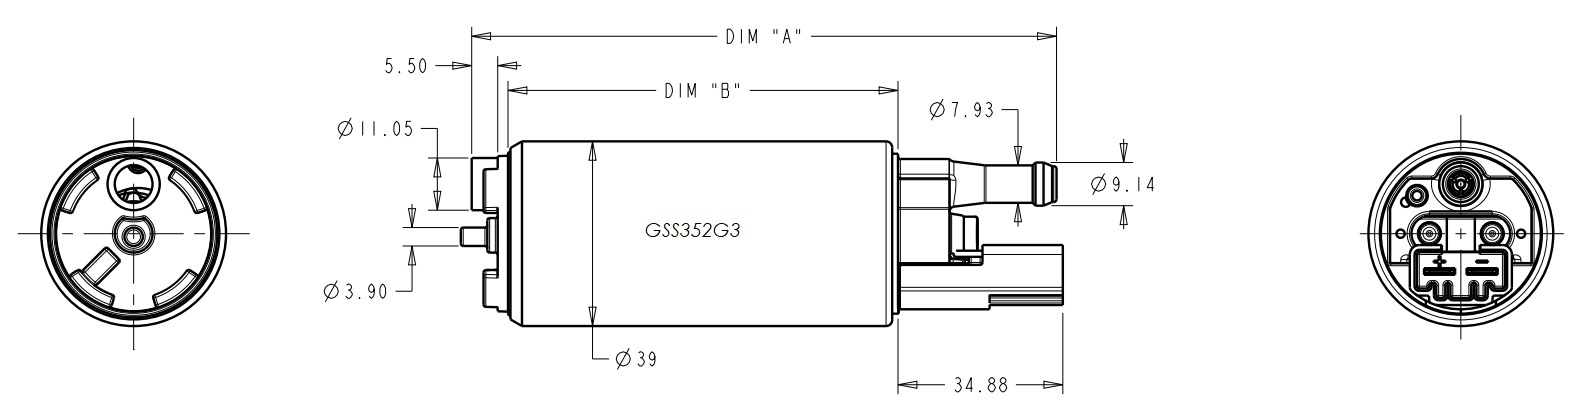 GSS352G3_Dimensions